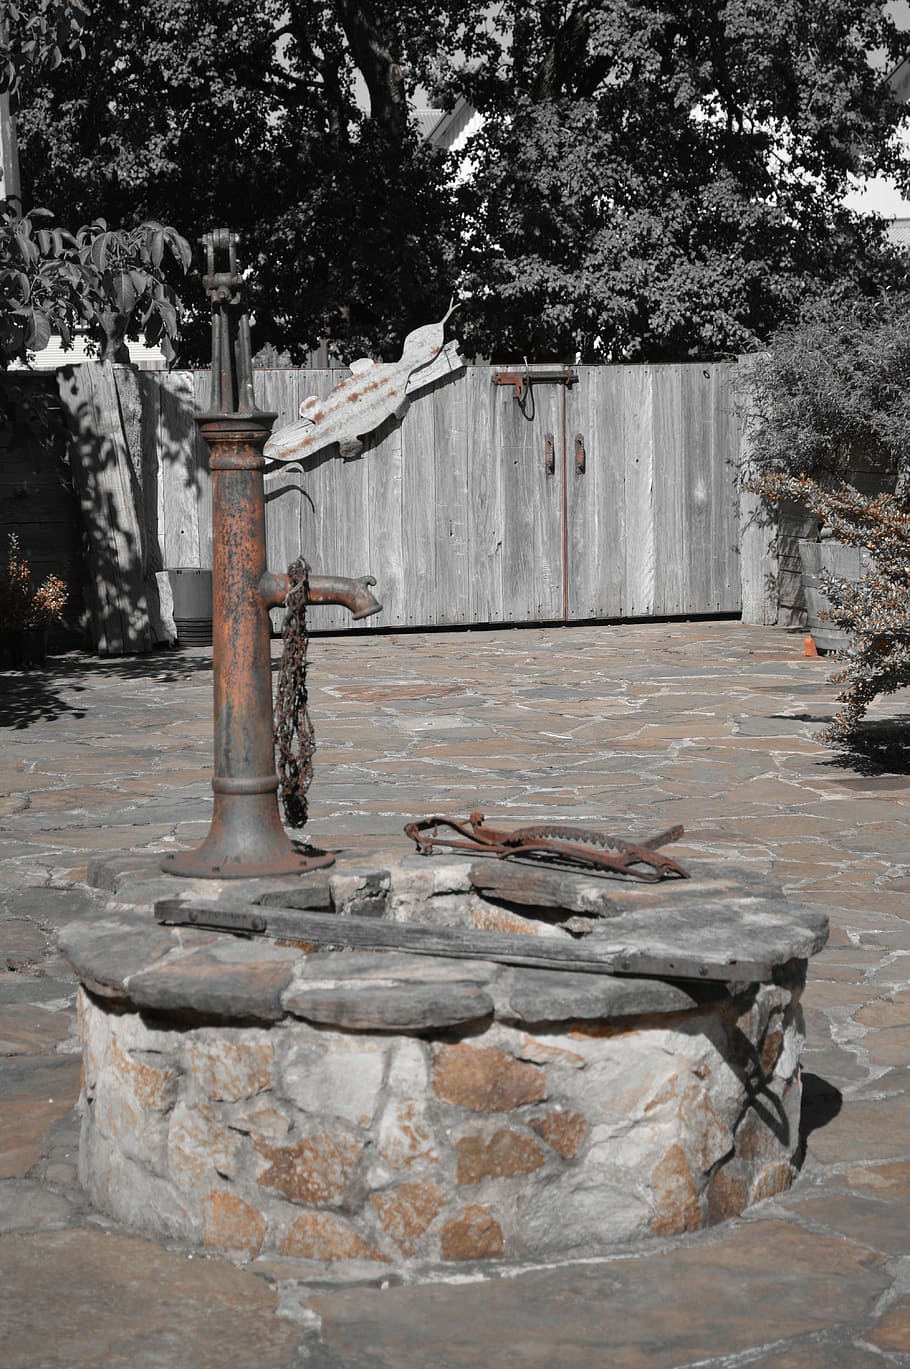 water pump, monochrome, artistic, tree, plant, architecture, day, built structure, nature, outdoors